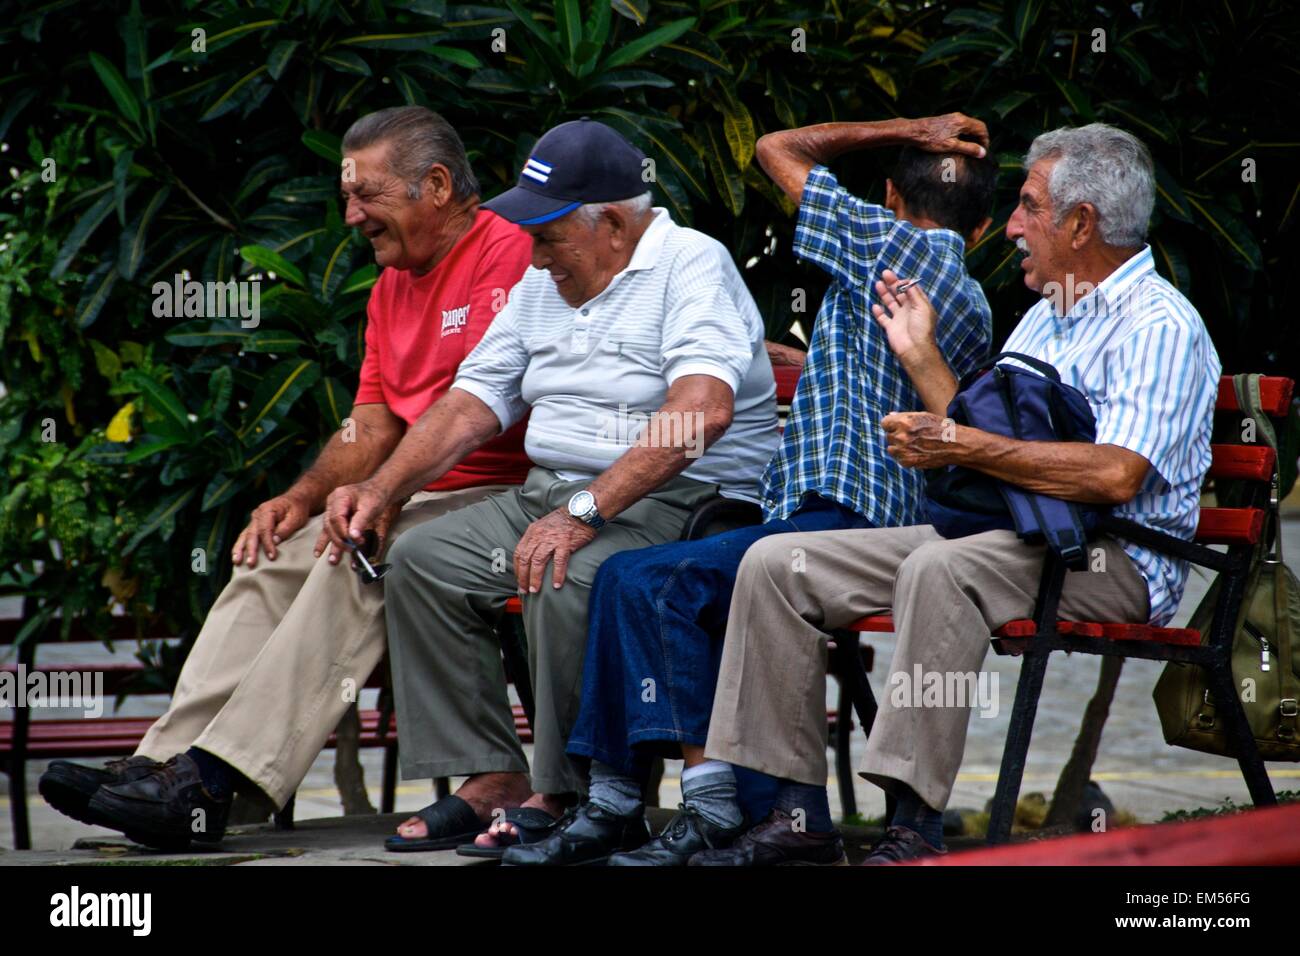 Old Cuban men gathered on a park bench laughing and socializing in Santa Clara, Cuba. Stock Photo